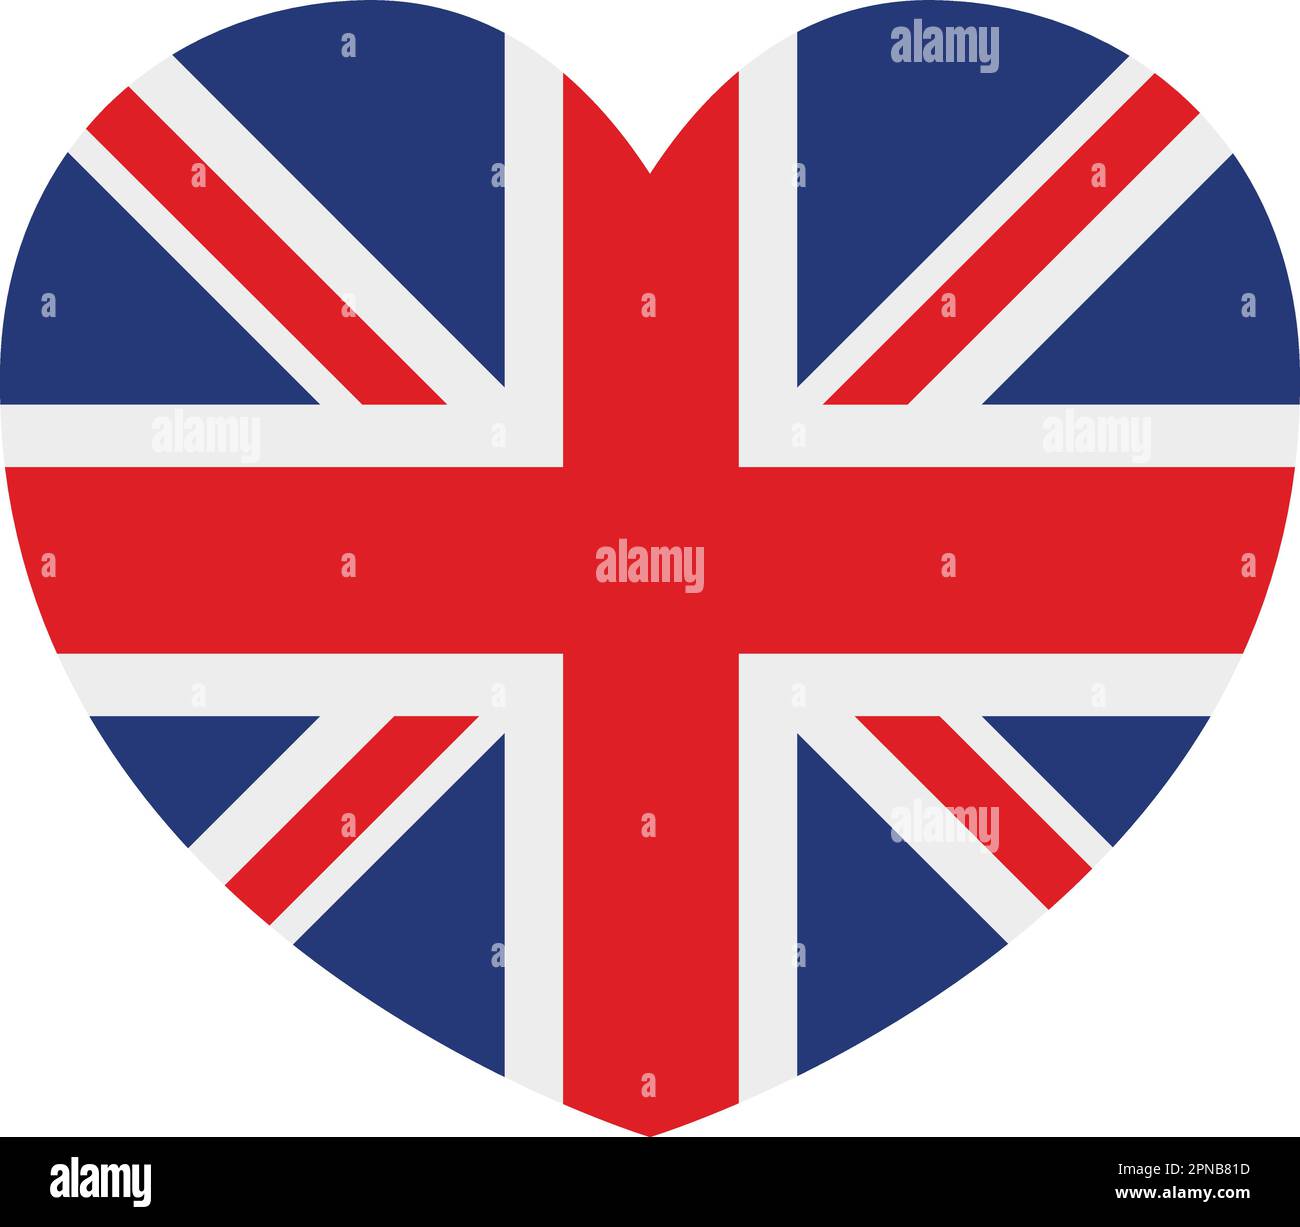 Union jack decal Stock Vector Images - Alamy